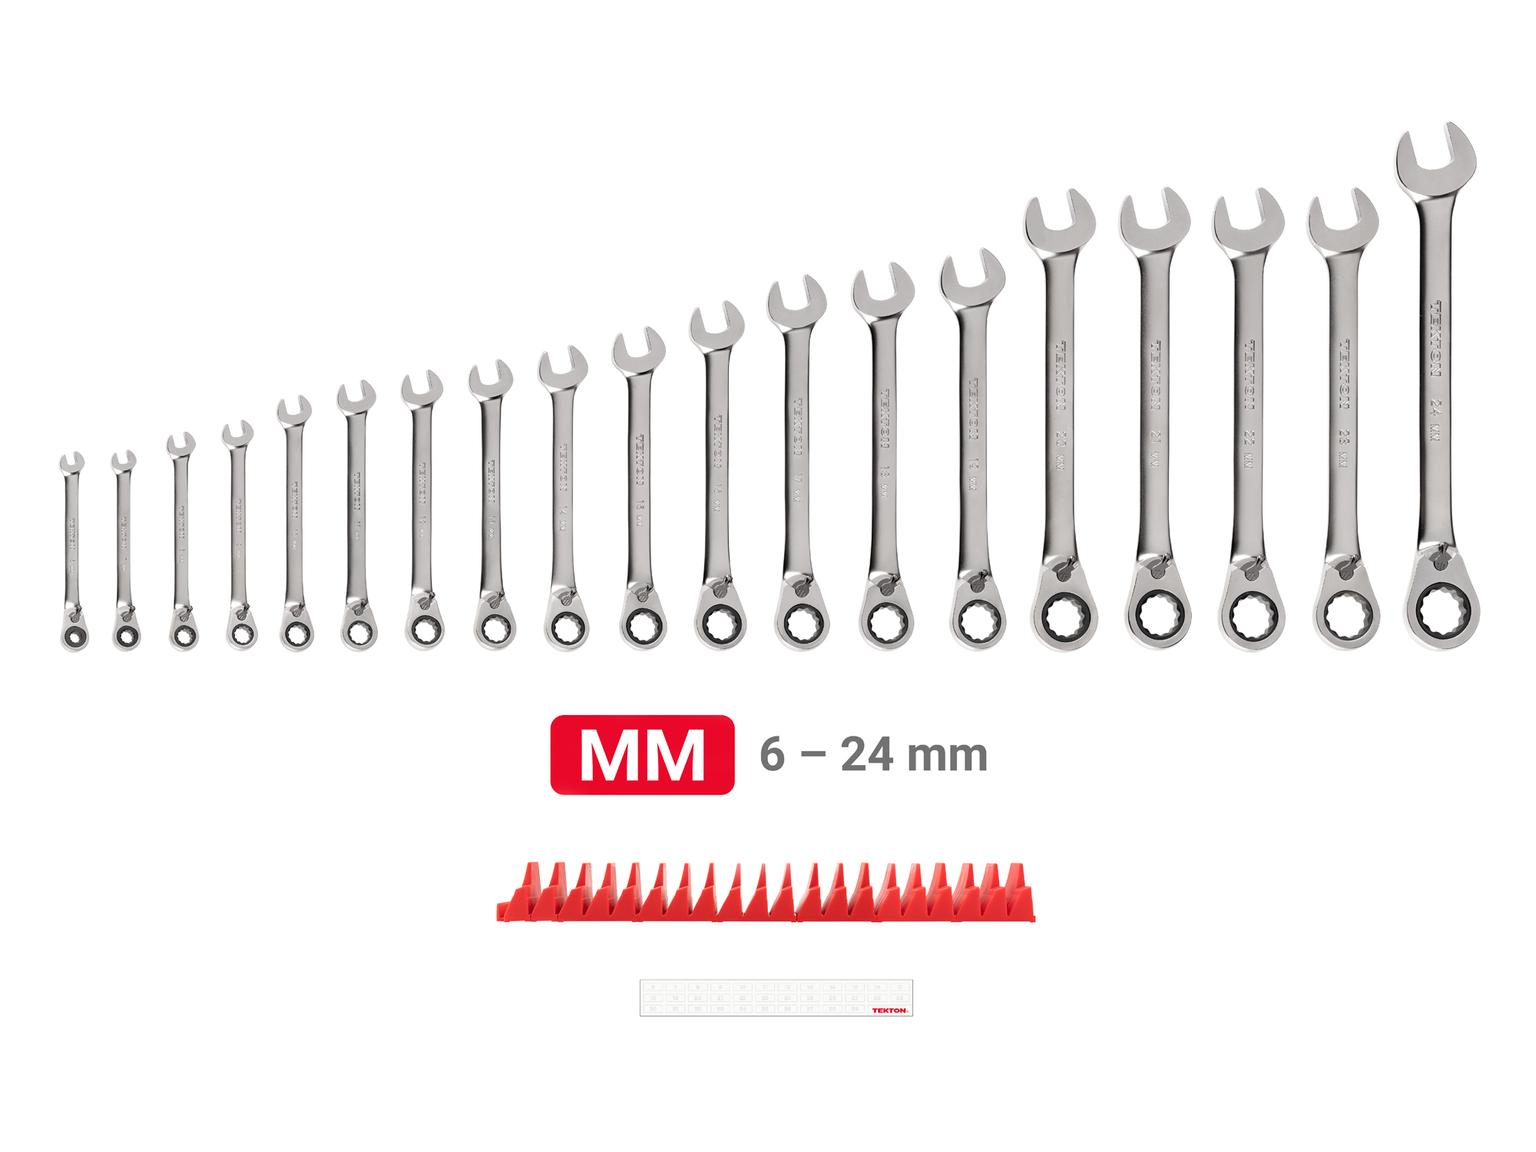 TEKTON WRC94303-T Reversible 12-Point Ratcheting Combination Wrench Set with Modular Slotted Organizer, 19-Piece (6-24 mm)